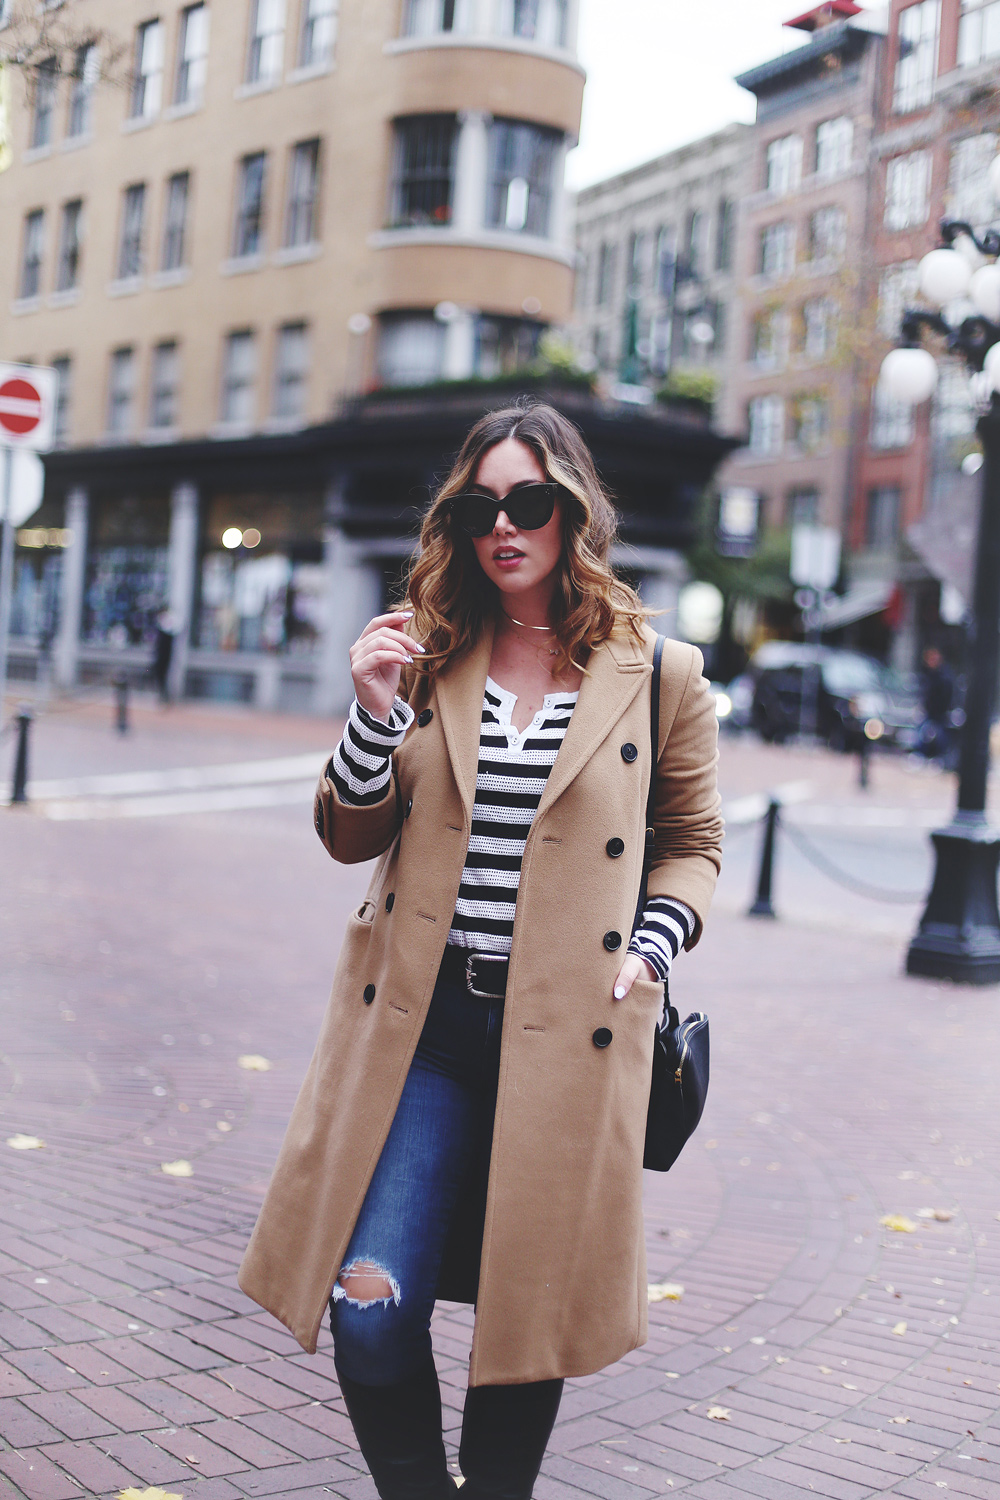 To Vogue or Bust shares camel coat outfit ideas in a camel Aritzia wilfred coat, Mavi skinny jeans, striped Gentle Fawn top, La Canadienne boots and Celine sunglasses in Gastown, Vancouver